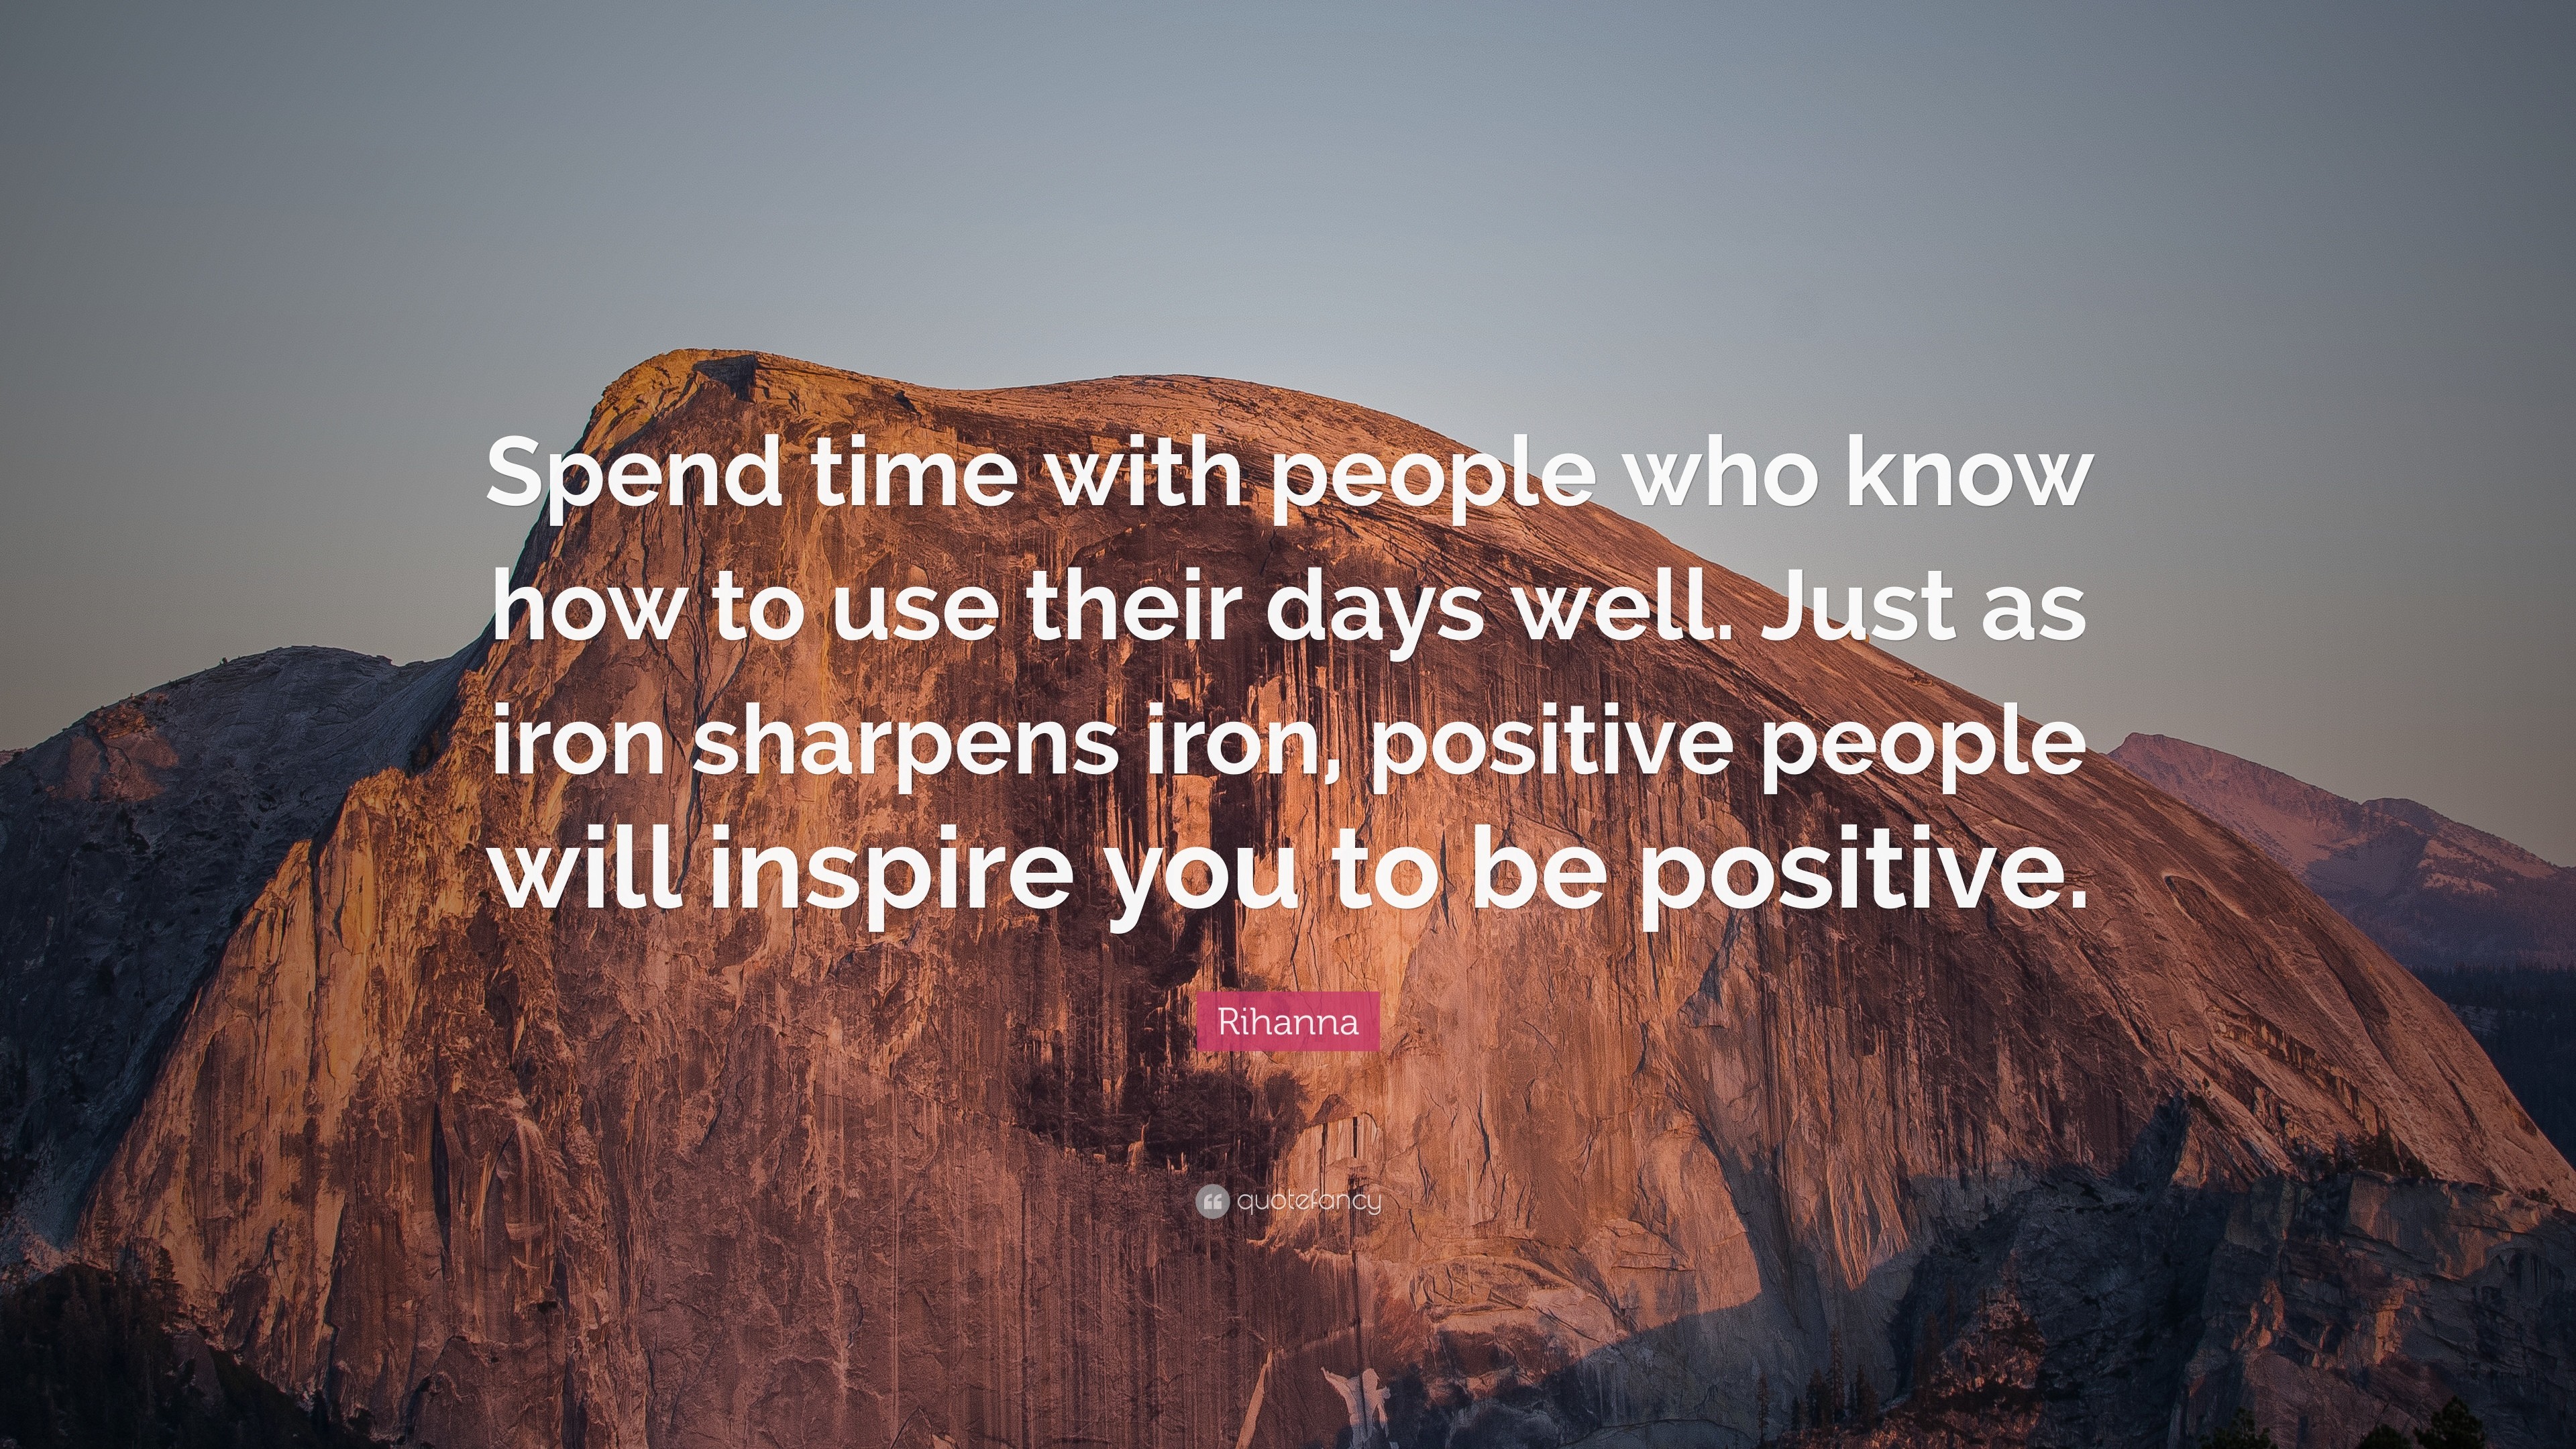 3840x2160 Rihanna Quote: “Spend time with people who know how to use their days well